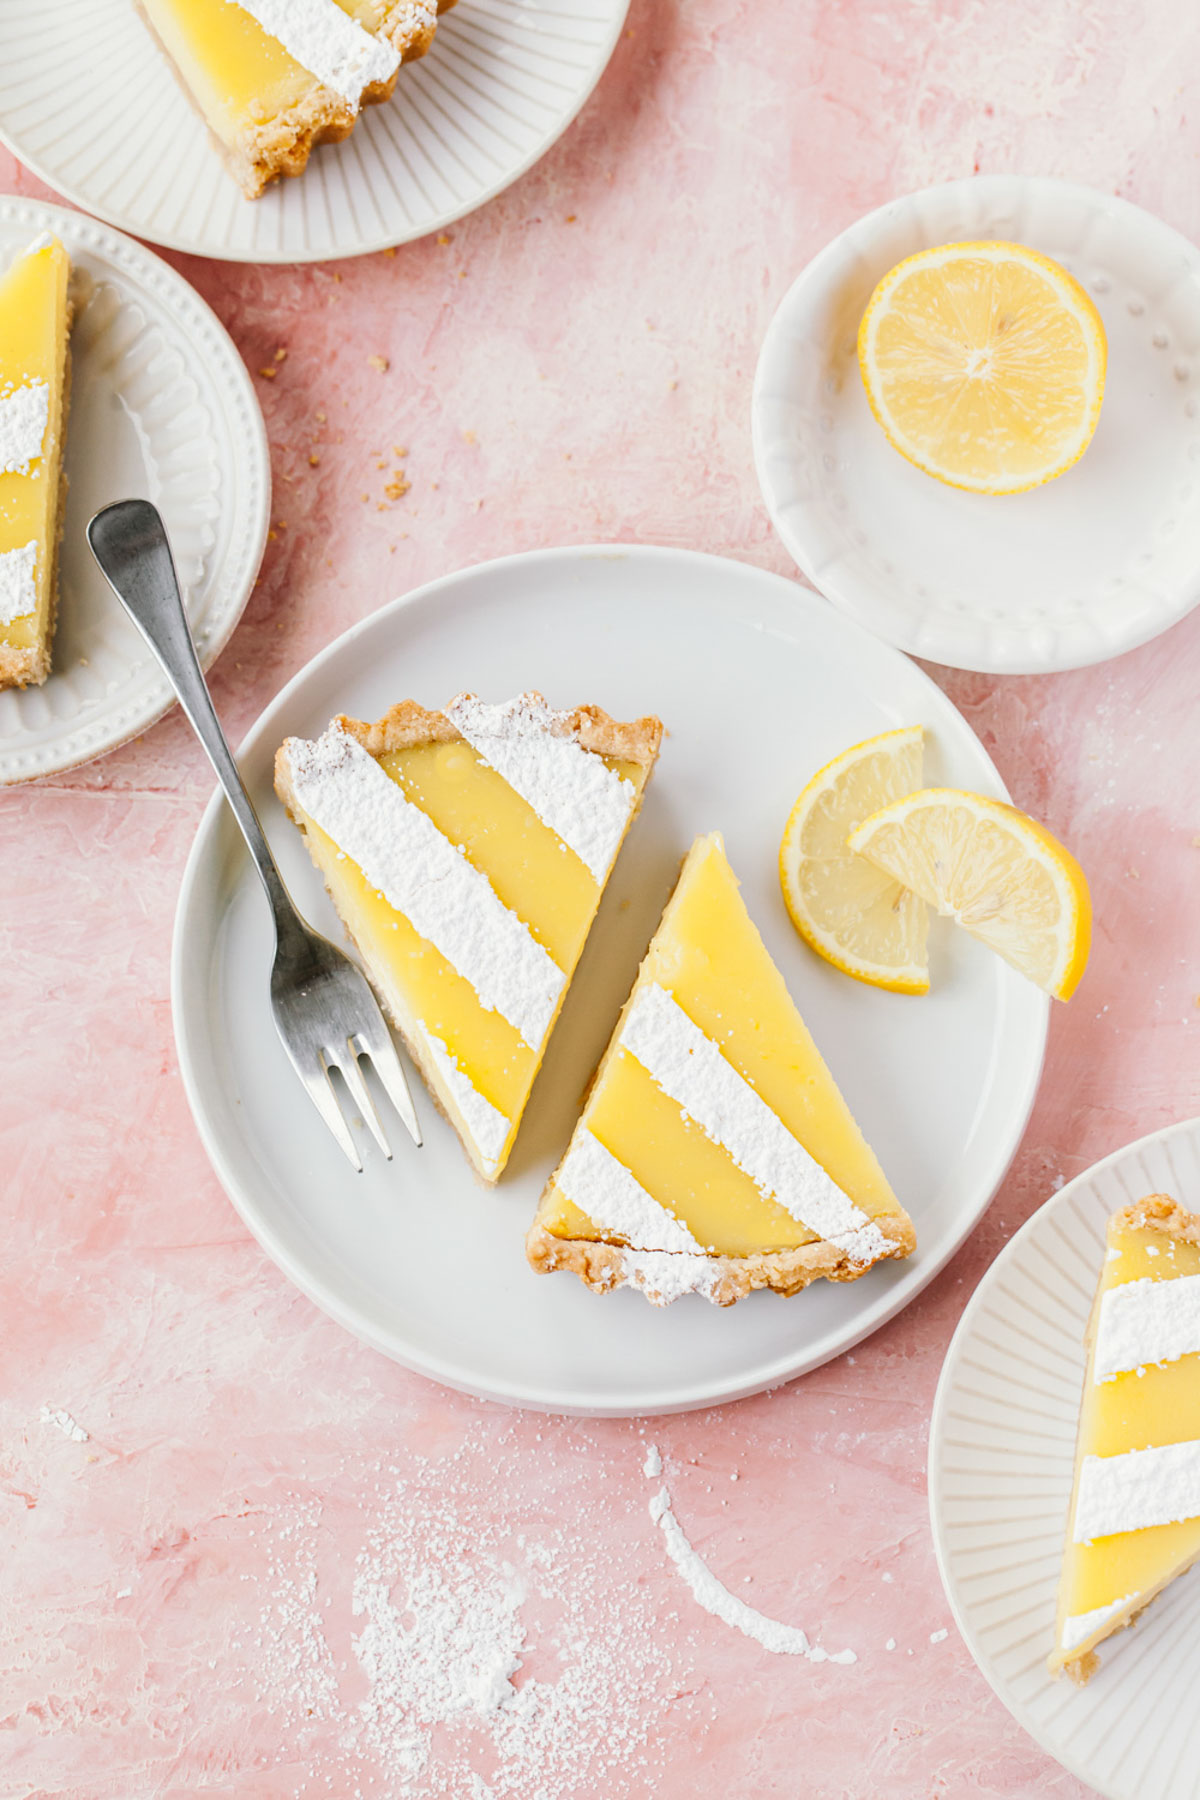 Slices of lemon tart with confectioners' sugar dusted on top